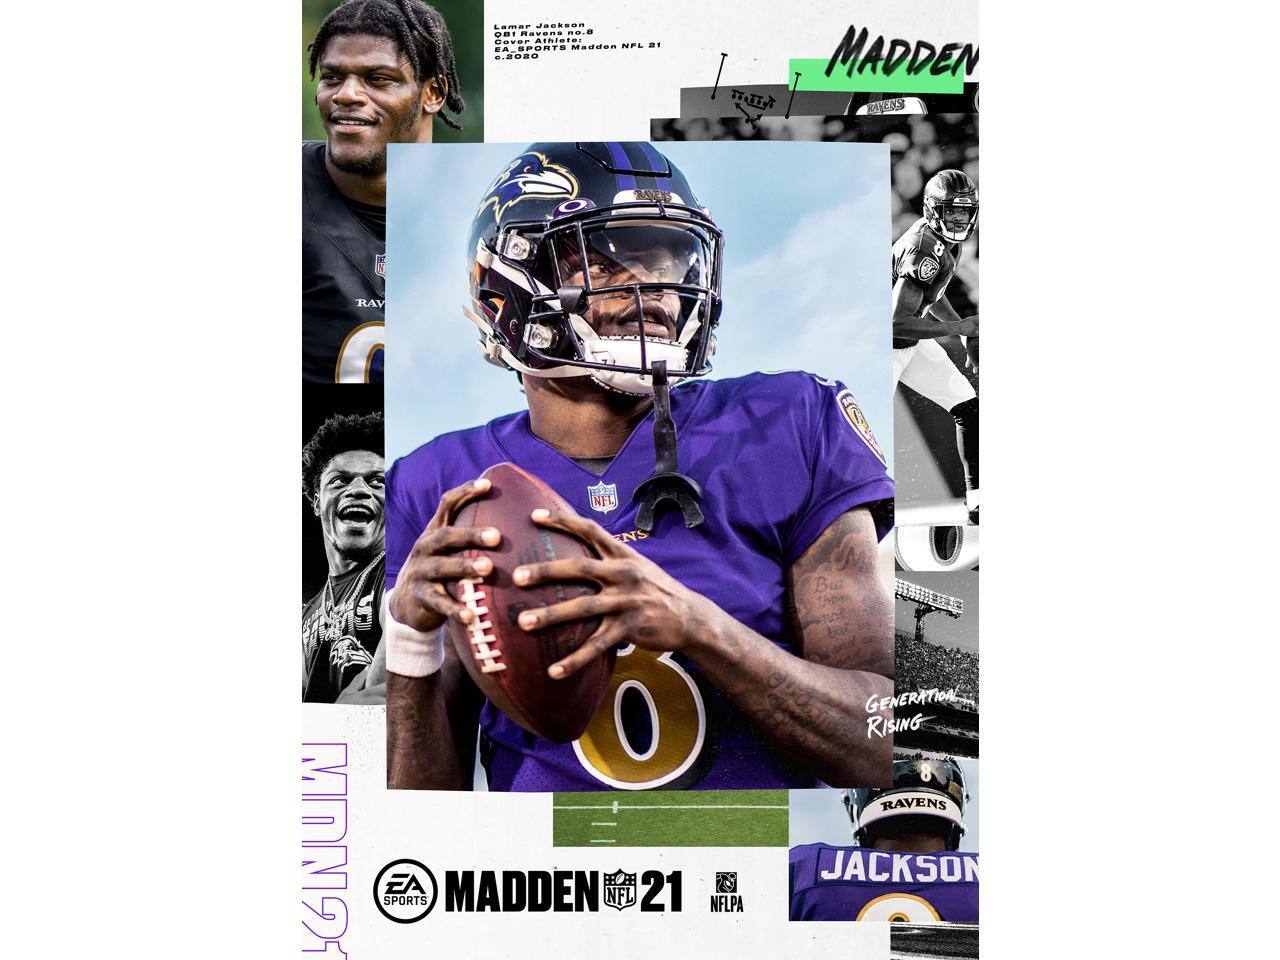 EA Origin (PC) Digital Games Sale - Madden NFL 21 for $13.49, FIFA 21 for $17.79, and more